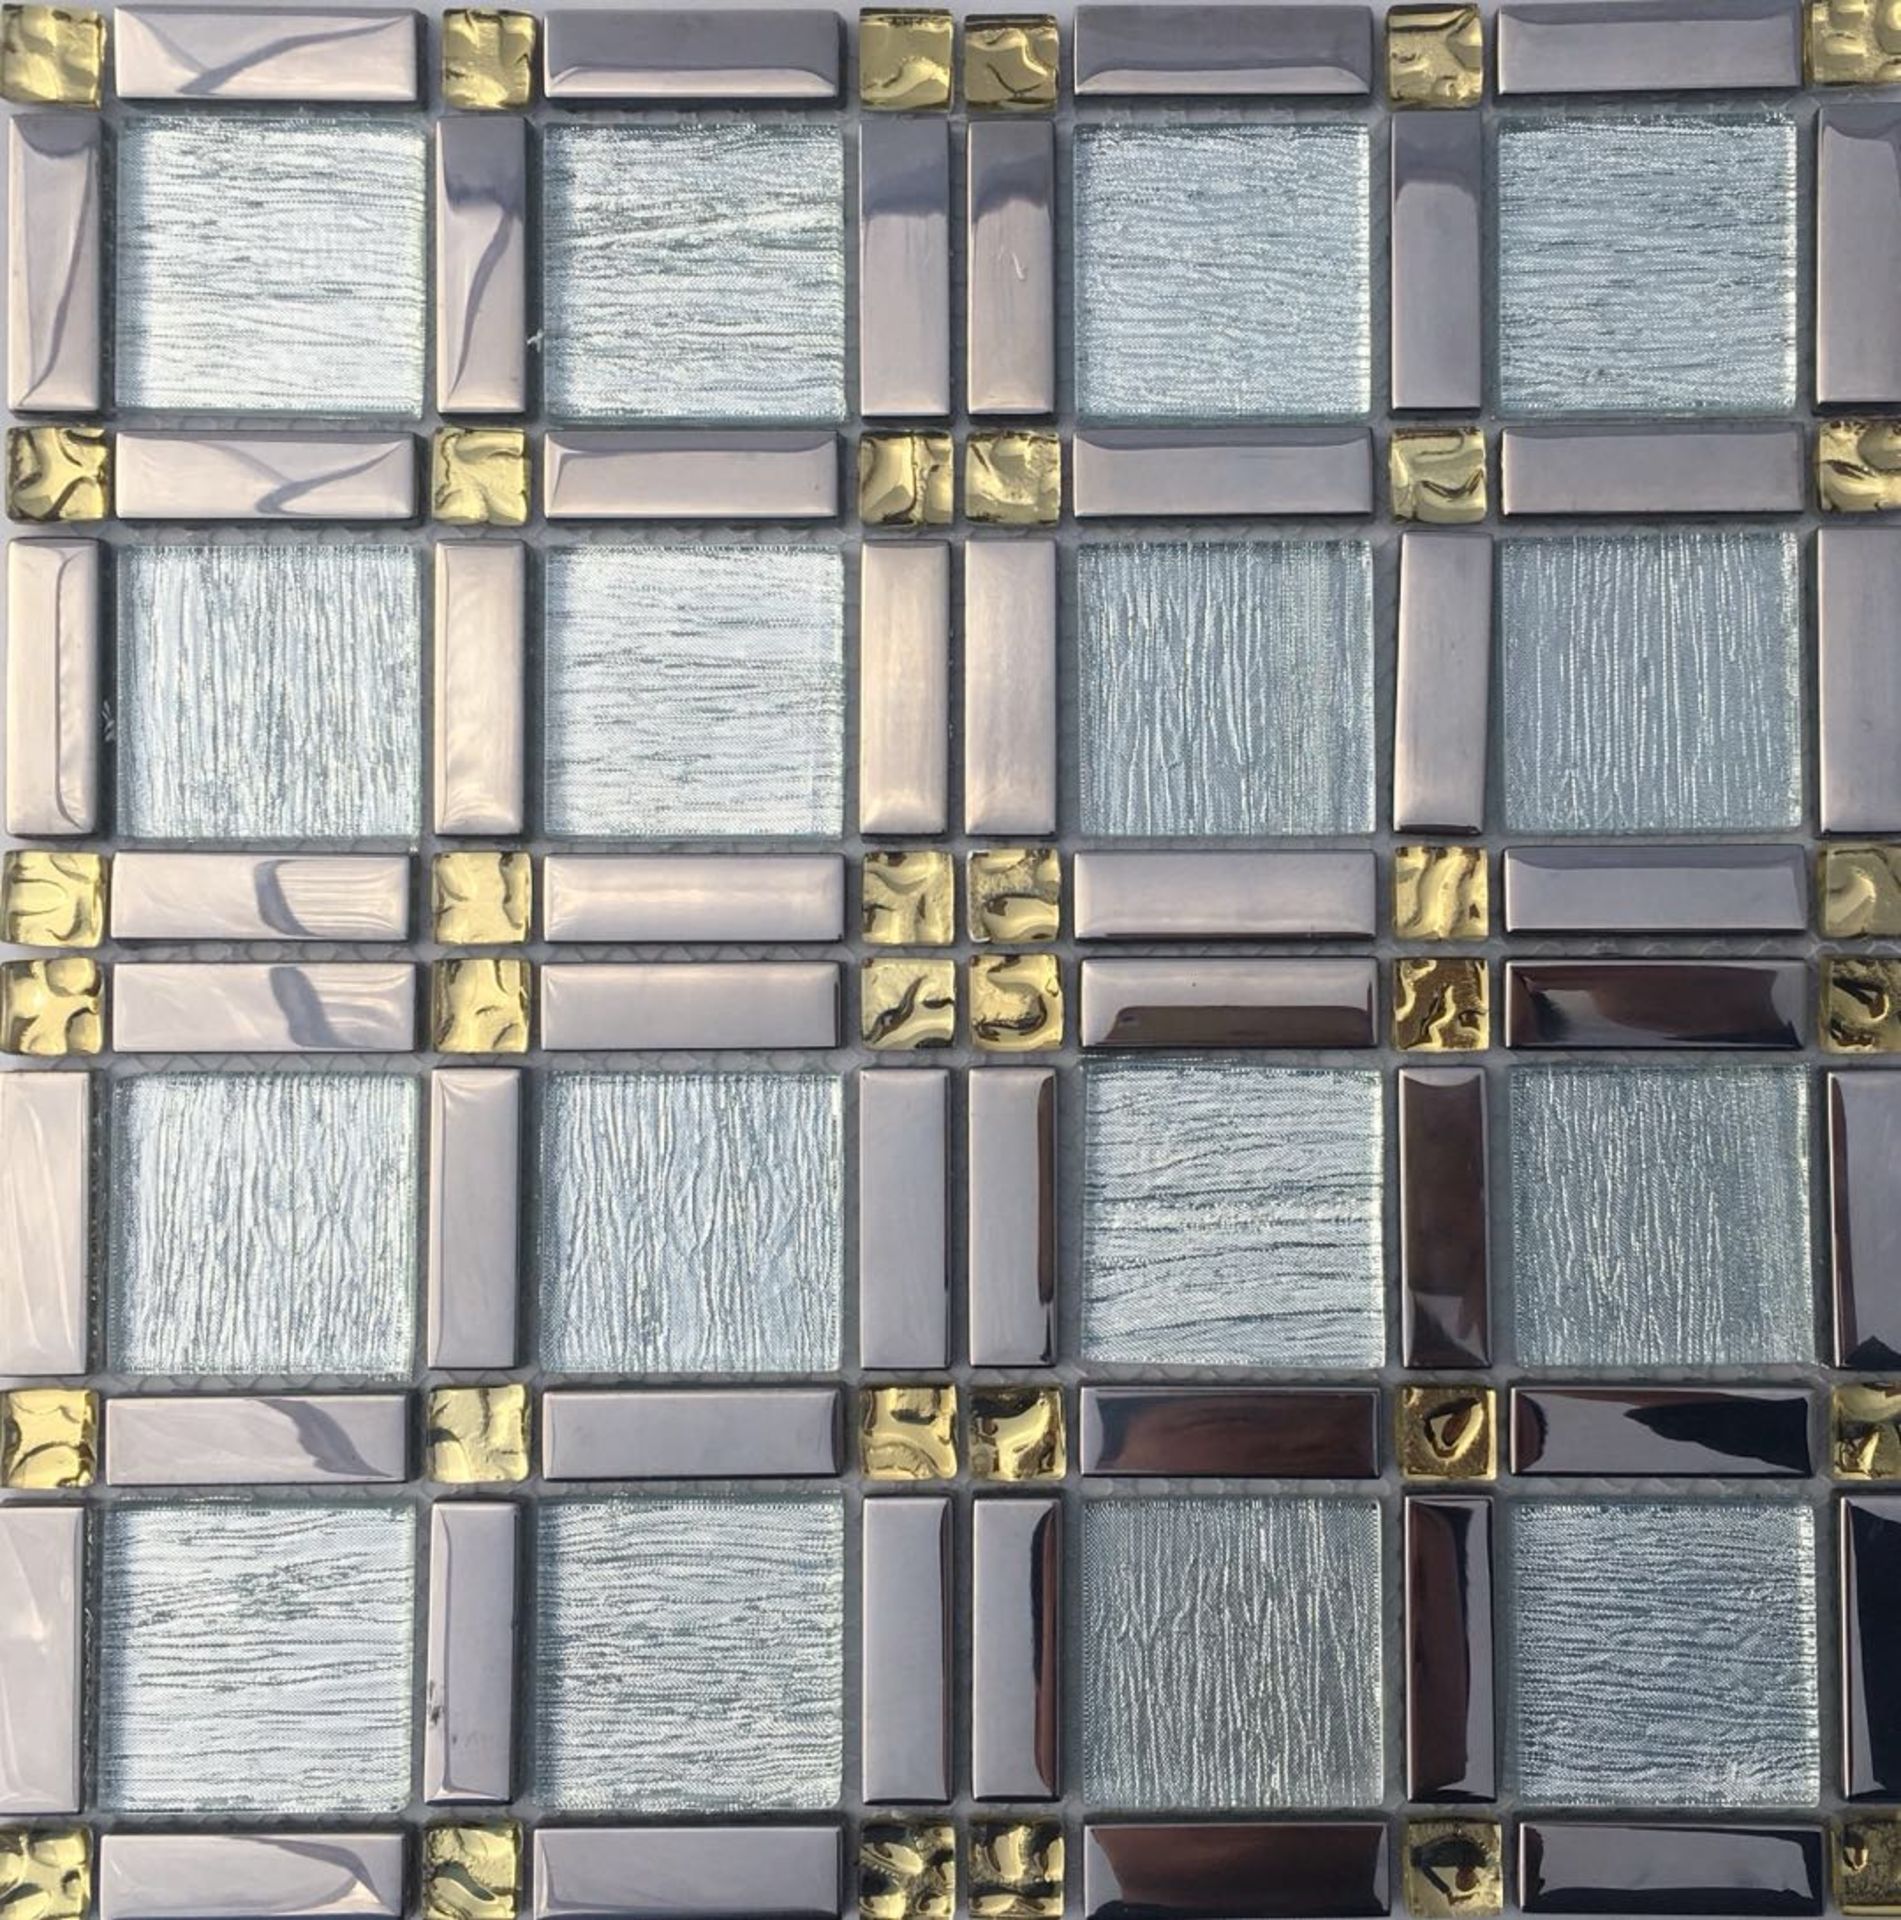 One Square Metre - Stock Clearance High Quality Glass/Stainless Steel Mosaic Tiles - 11 Sheets - Image 2 of 2